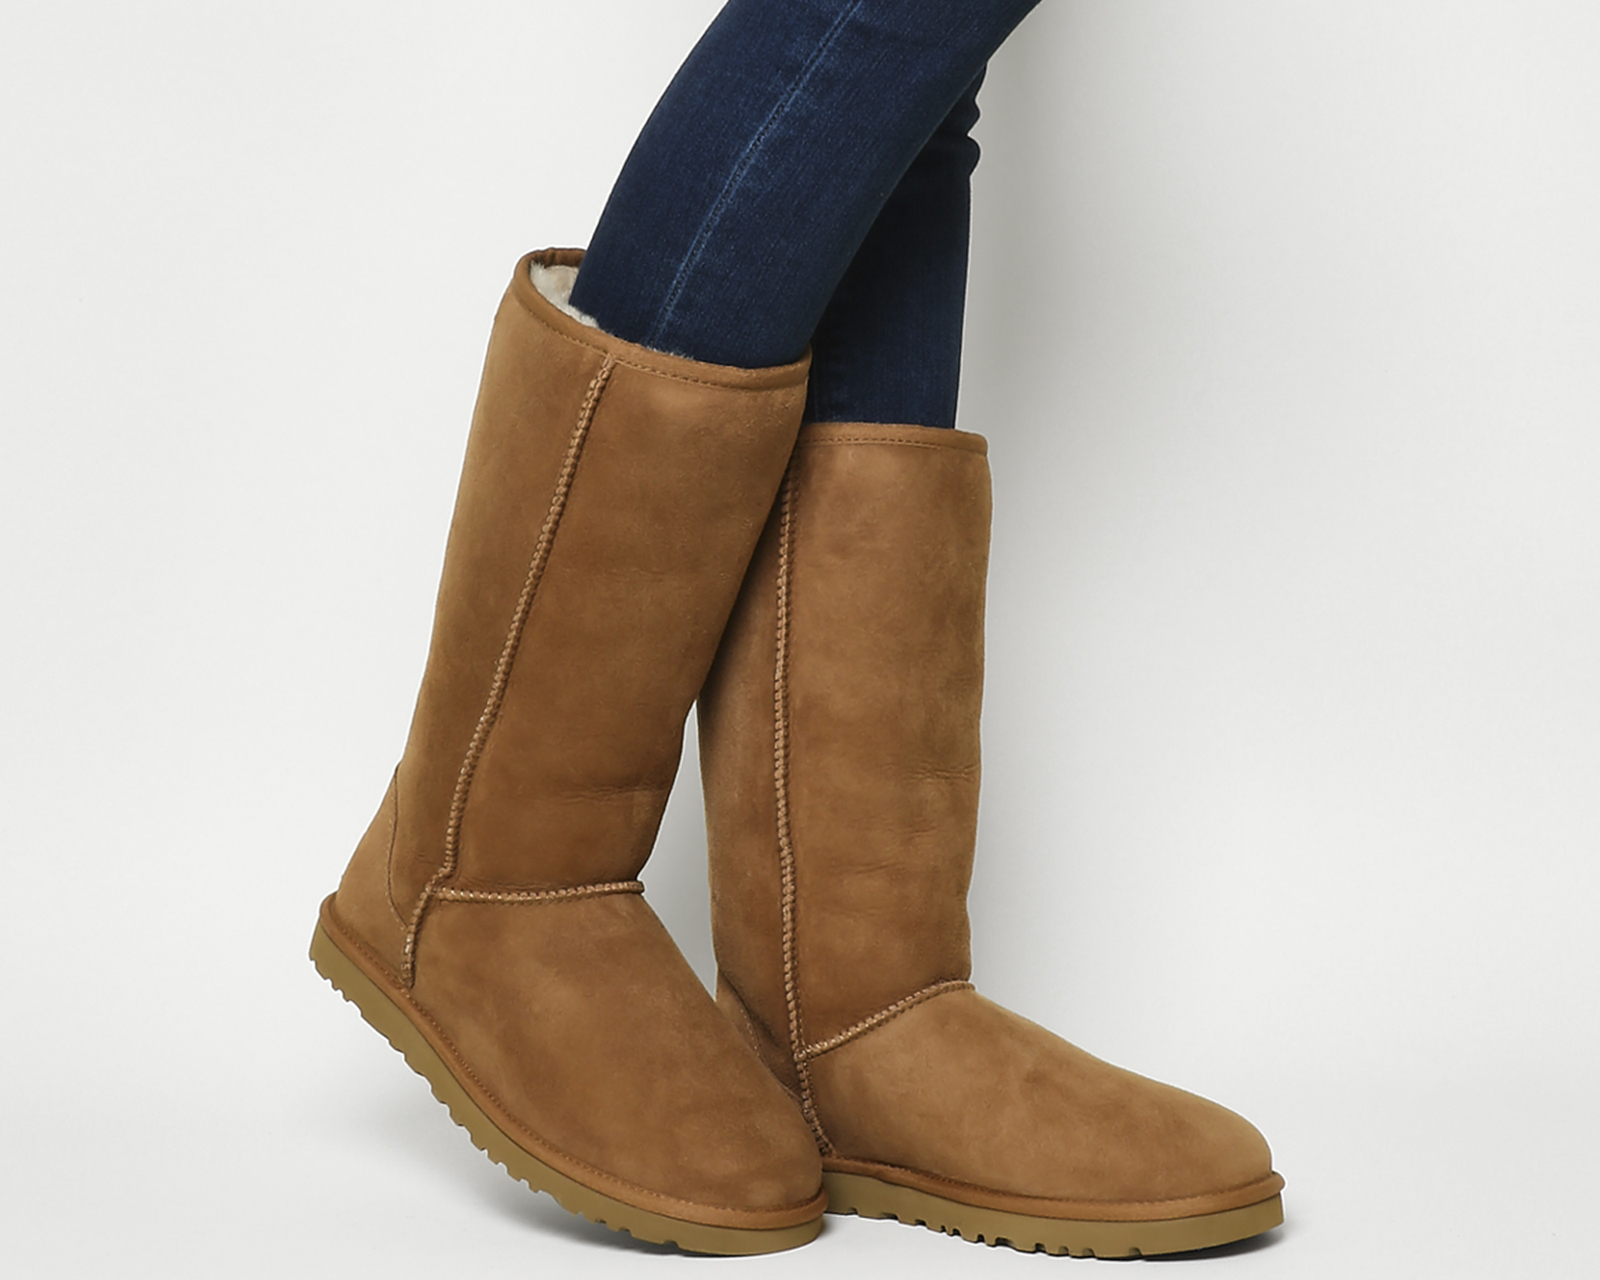 Ugg Classic Tall Boots Chestnut Knee High Boots